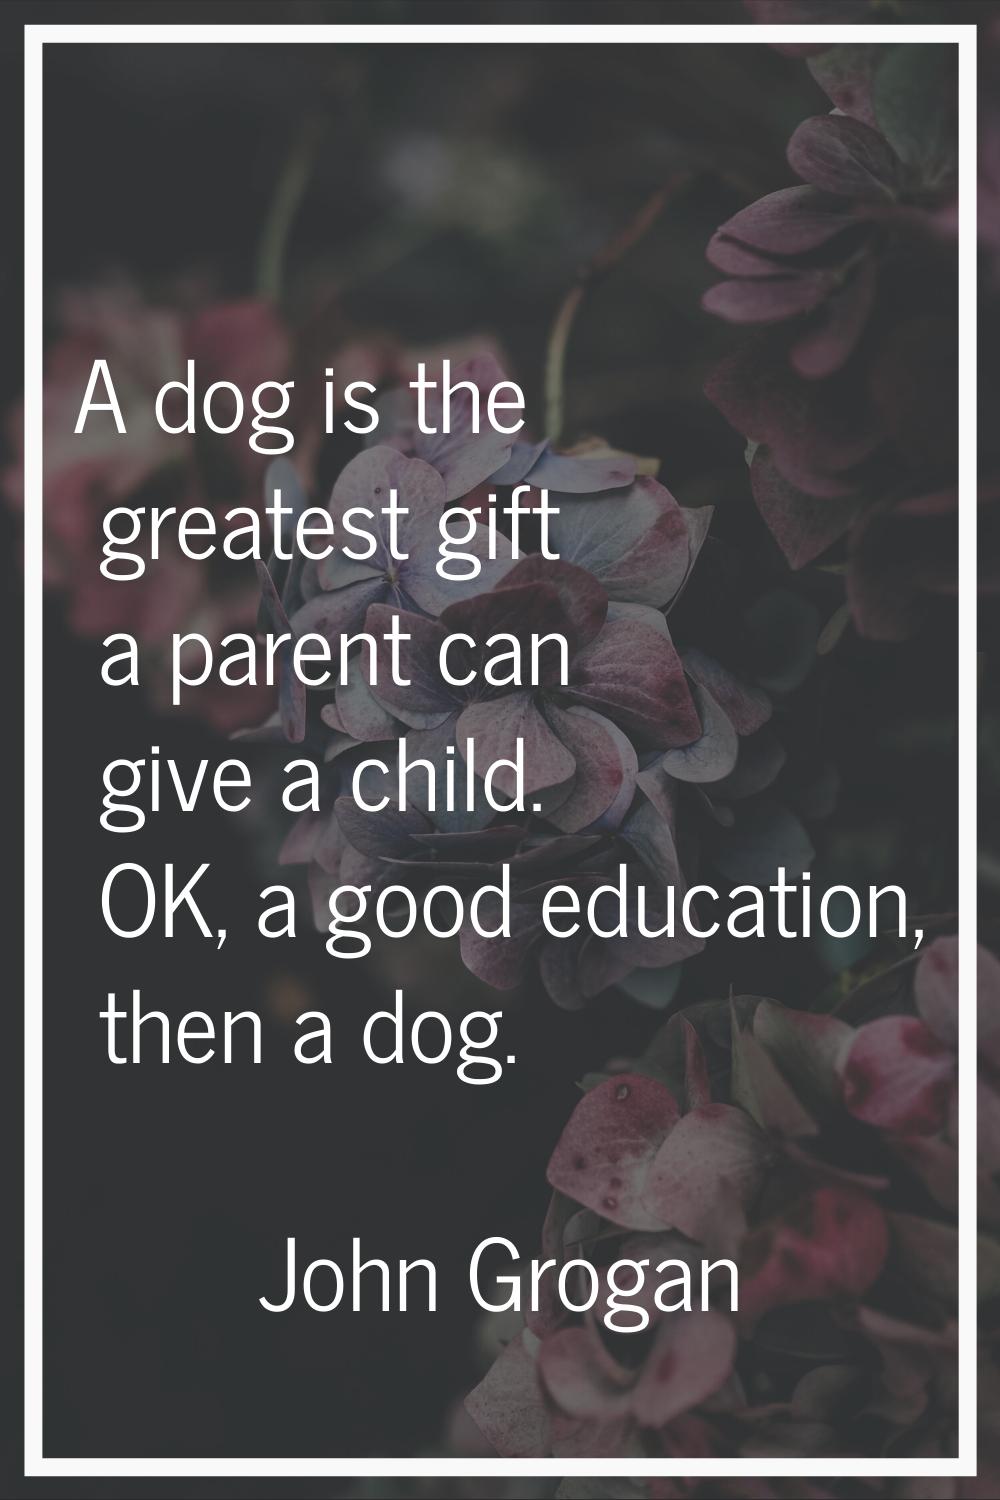 A dog is the greatest gift a parent can give a child. OK, a good education, then a dog.